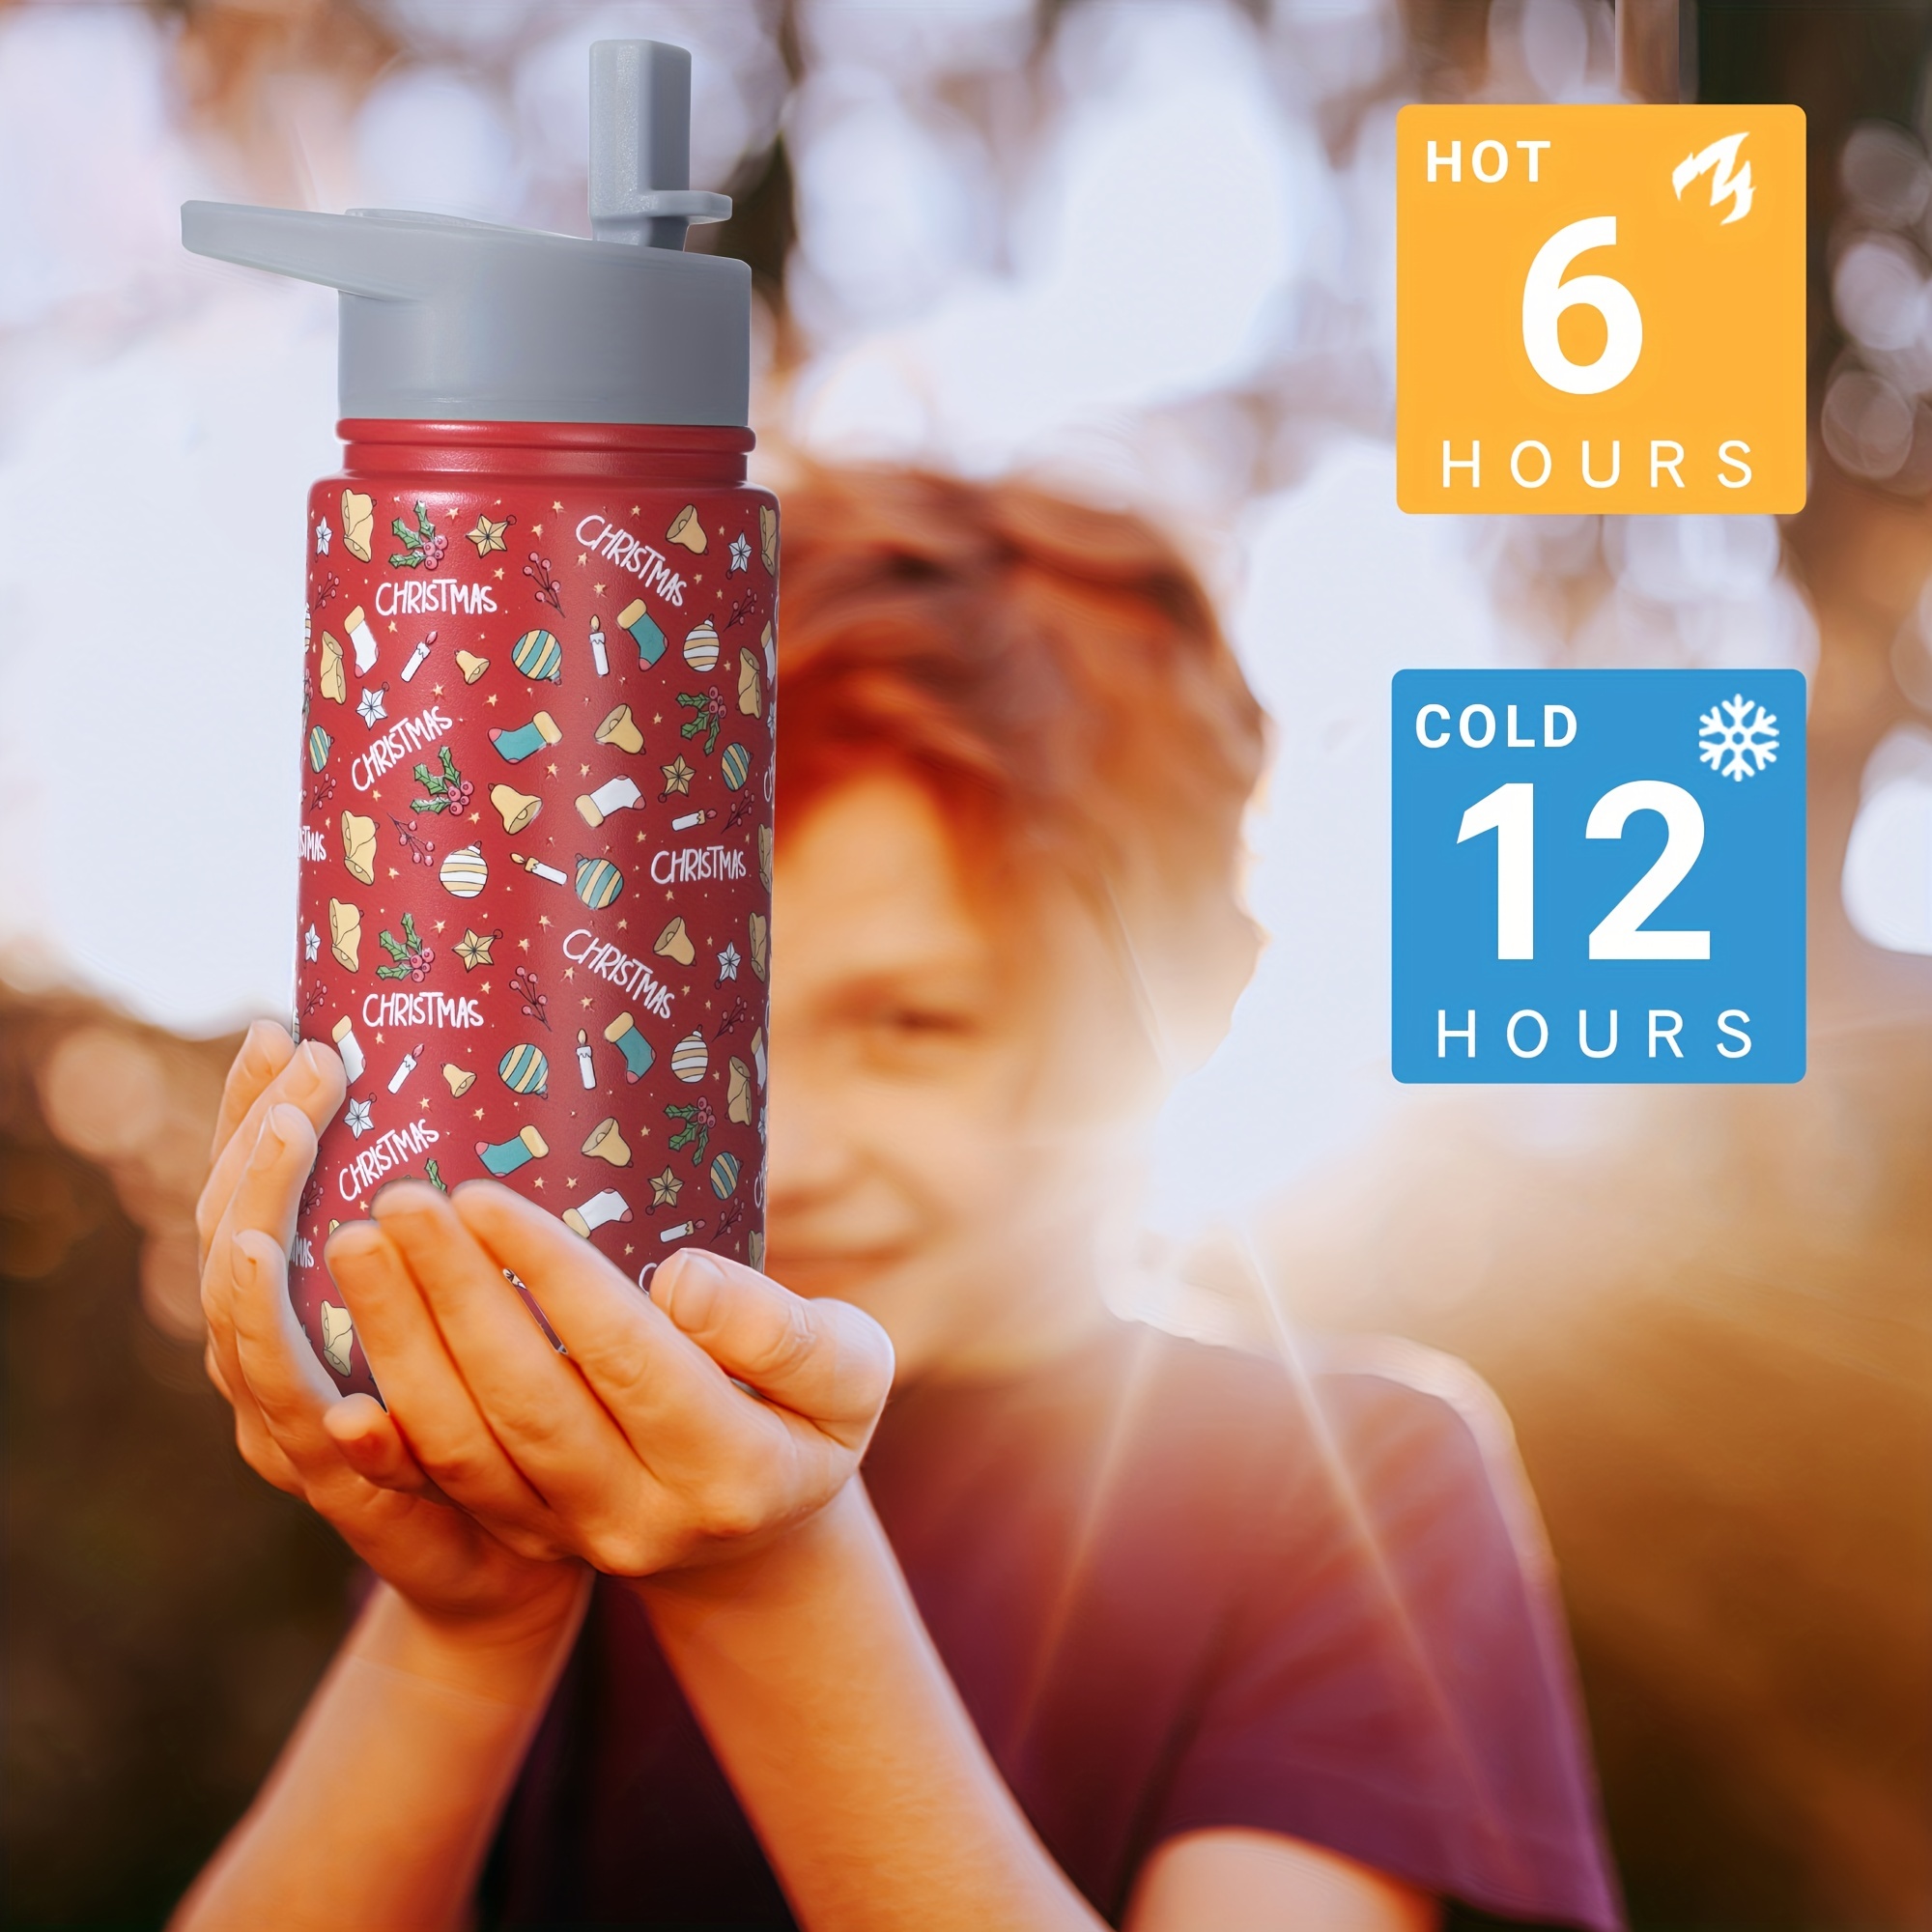 JIAOAO 2 Pcs Sublimation Sippy Cups Stainless Steel Straight